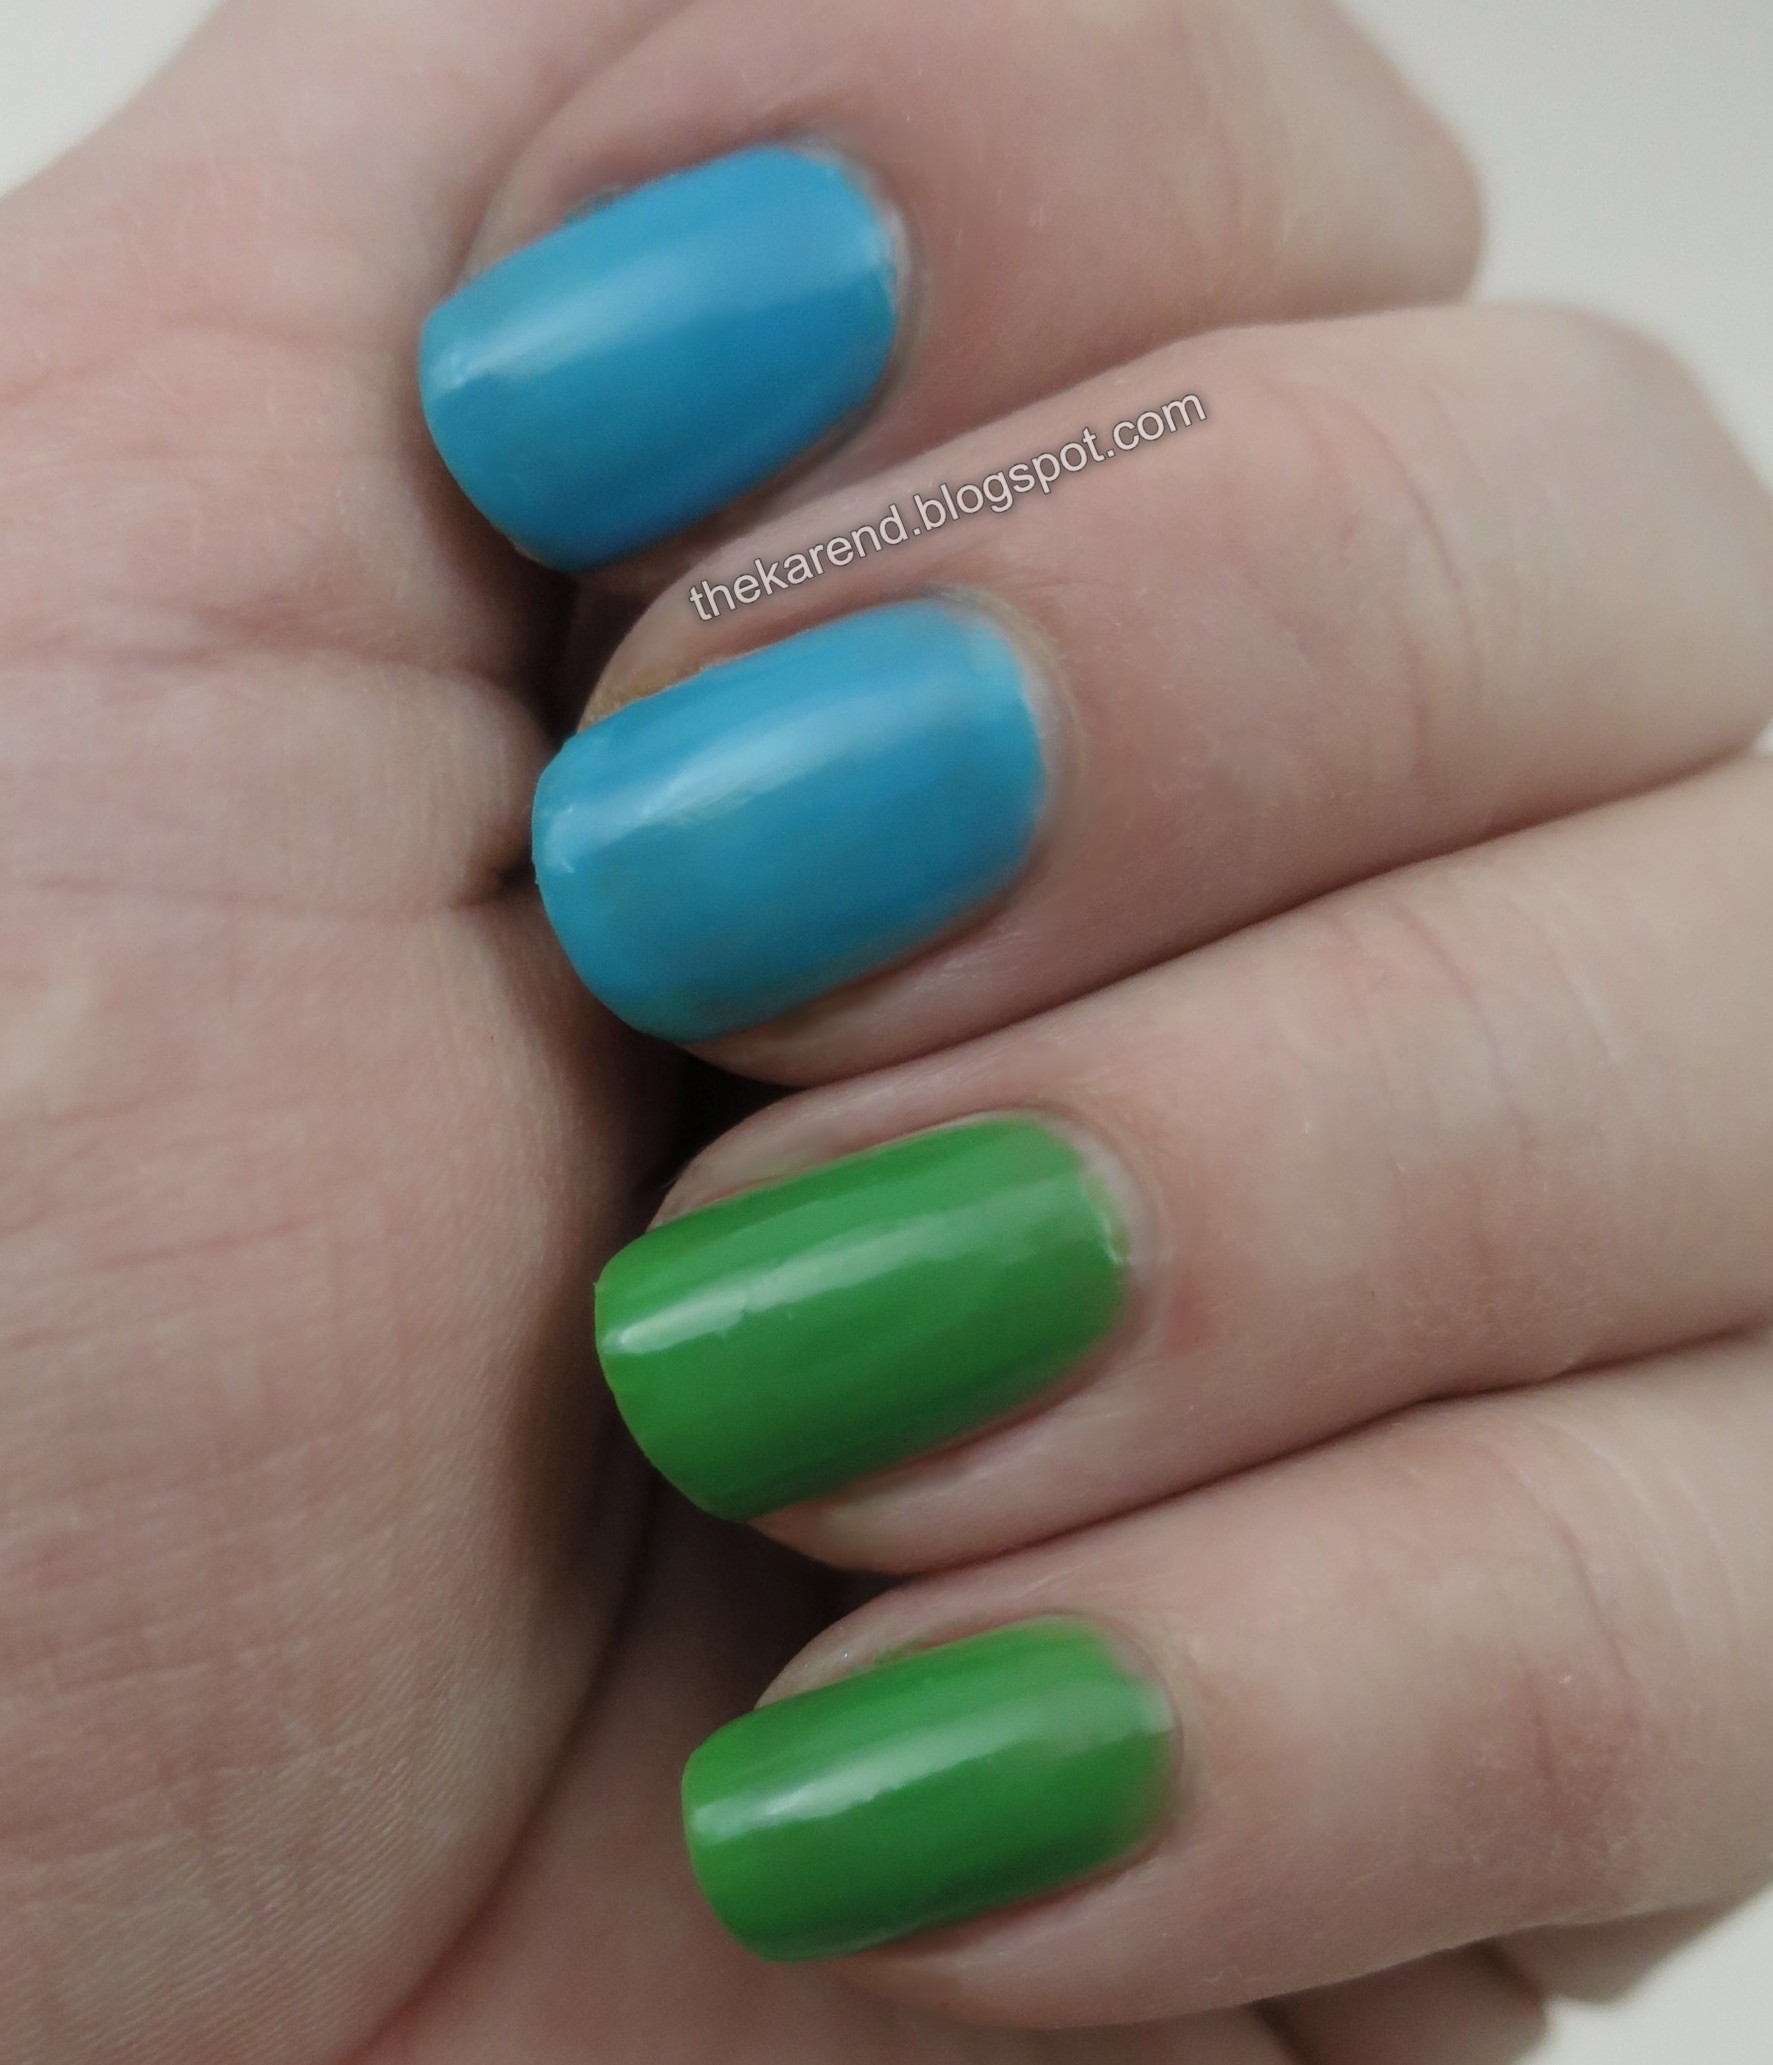 Sinful Colors and Neons Aniploish Wicked Collection | Bloglovin\' Frazzle 